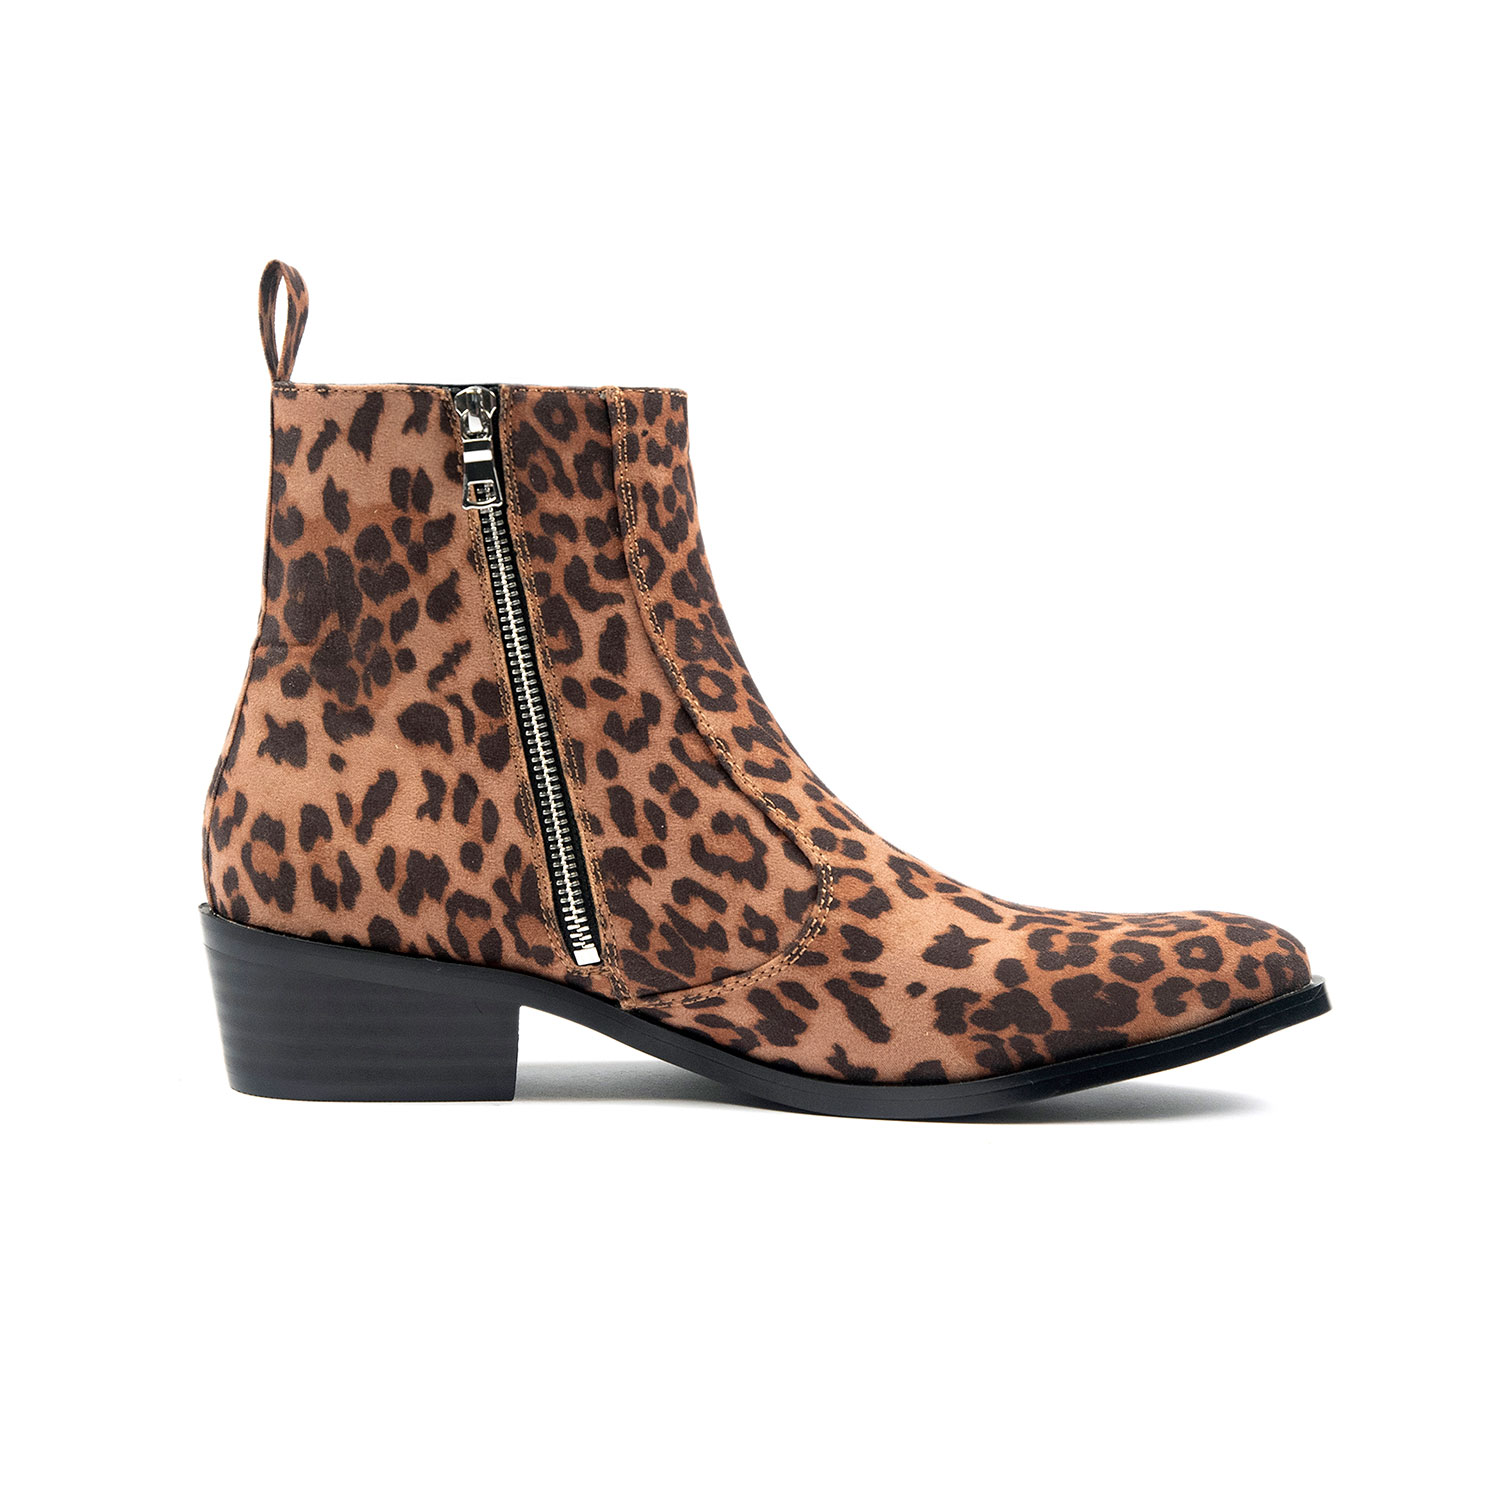 Vegan Richards - Leopard Zip Boots | Straight To Hell Apparel